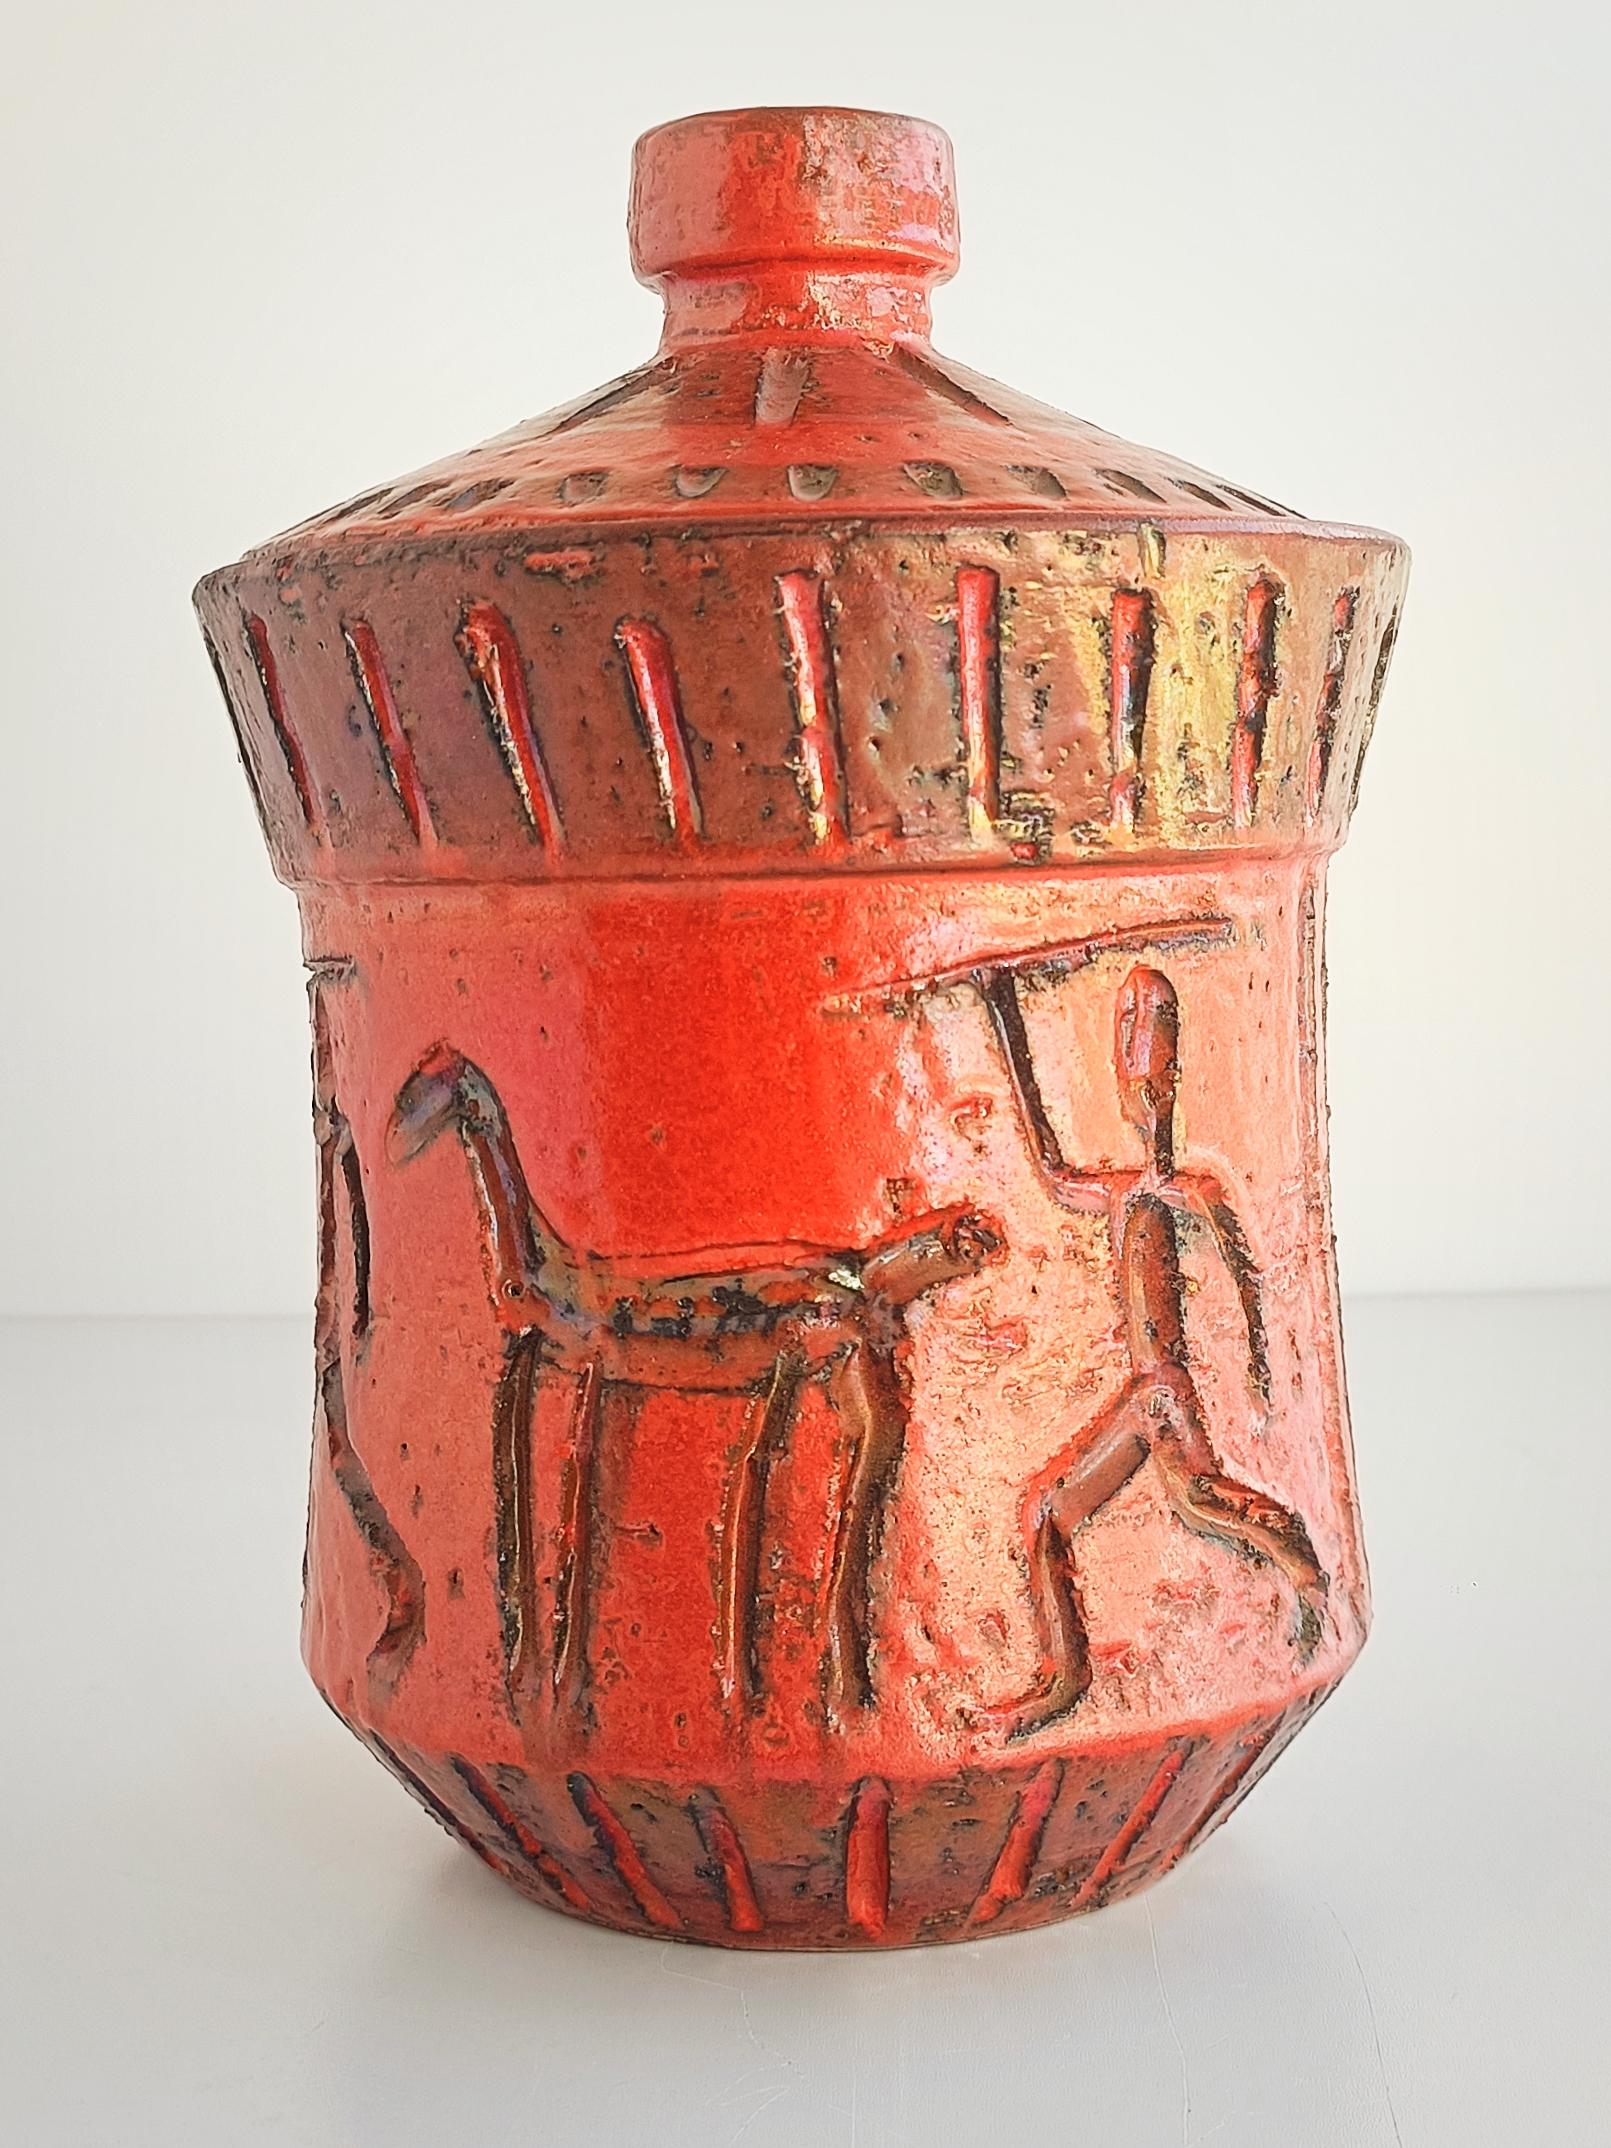 Bitossi by Aldo Londi Mid Century Modern primitivist ceramic jar, a rare stunning vintage piece featuring a gorgeous coral satin glazing and a sgraffito hand decoration which represents a prehistoric haunting scene. Explore the beauty and uniqueness